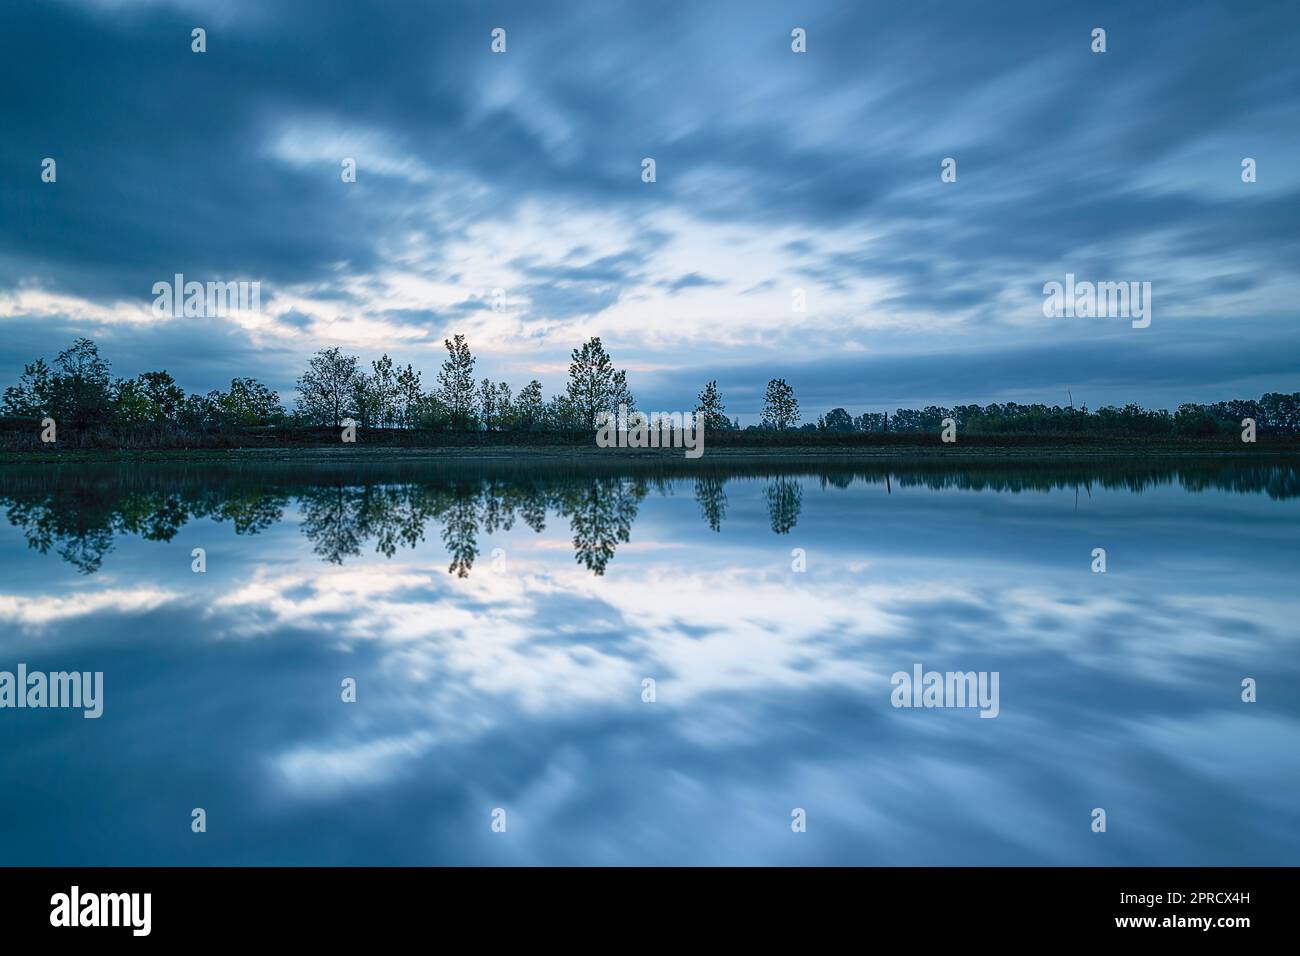 At dusk, reflection lake with clouds Stock Photo